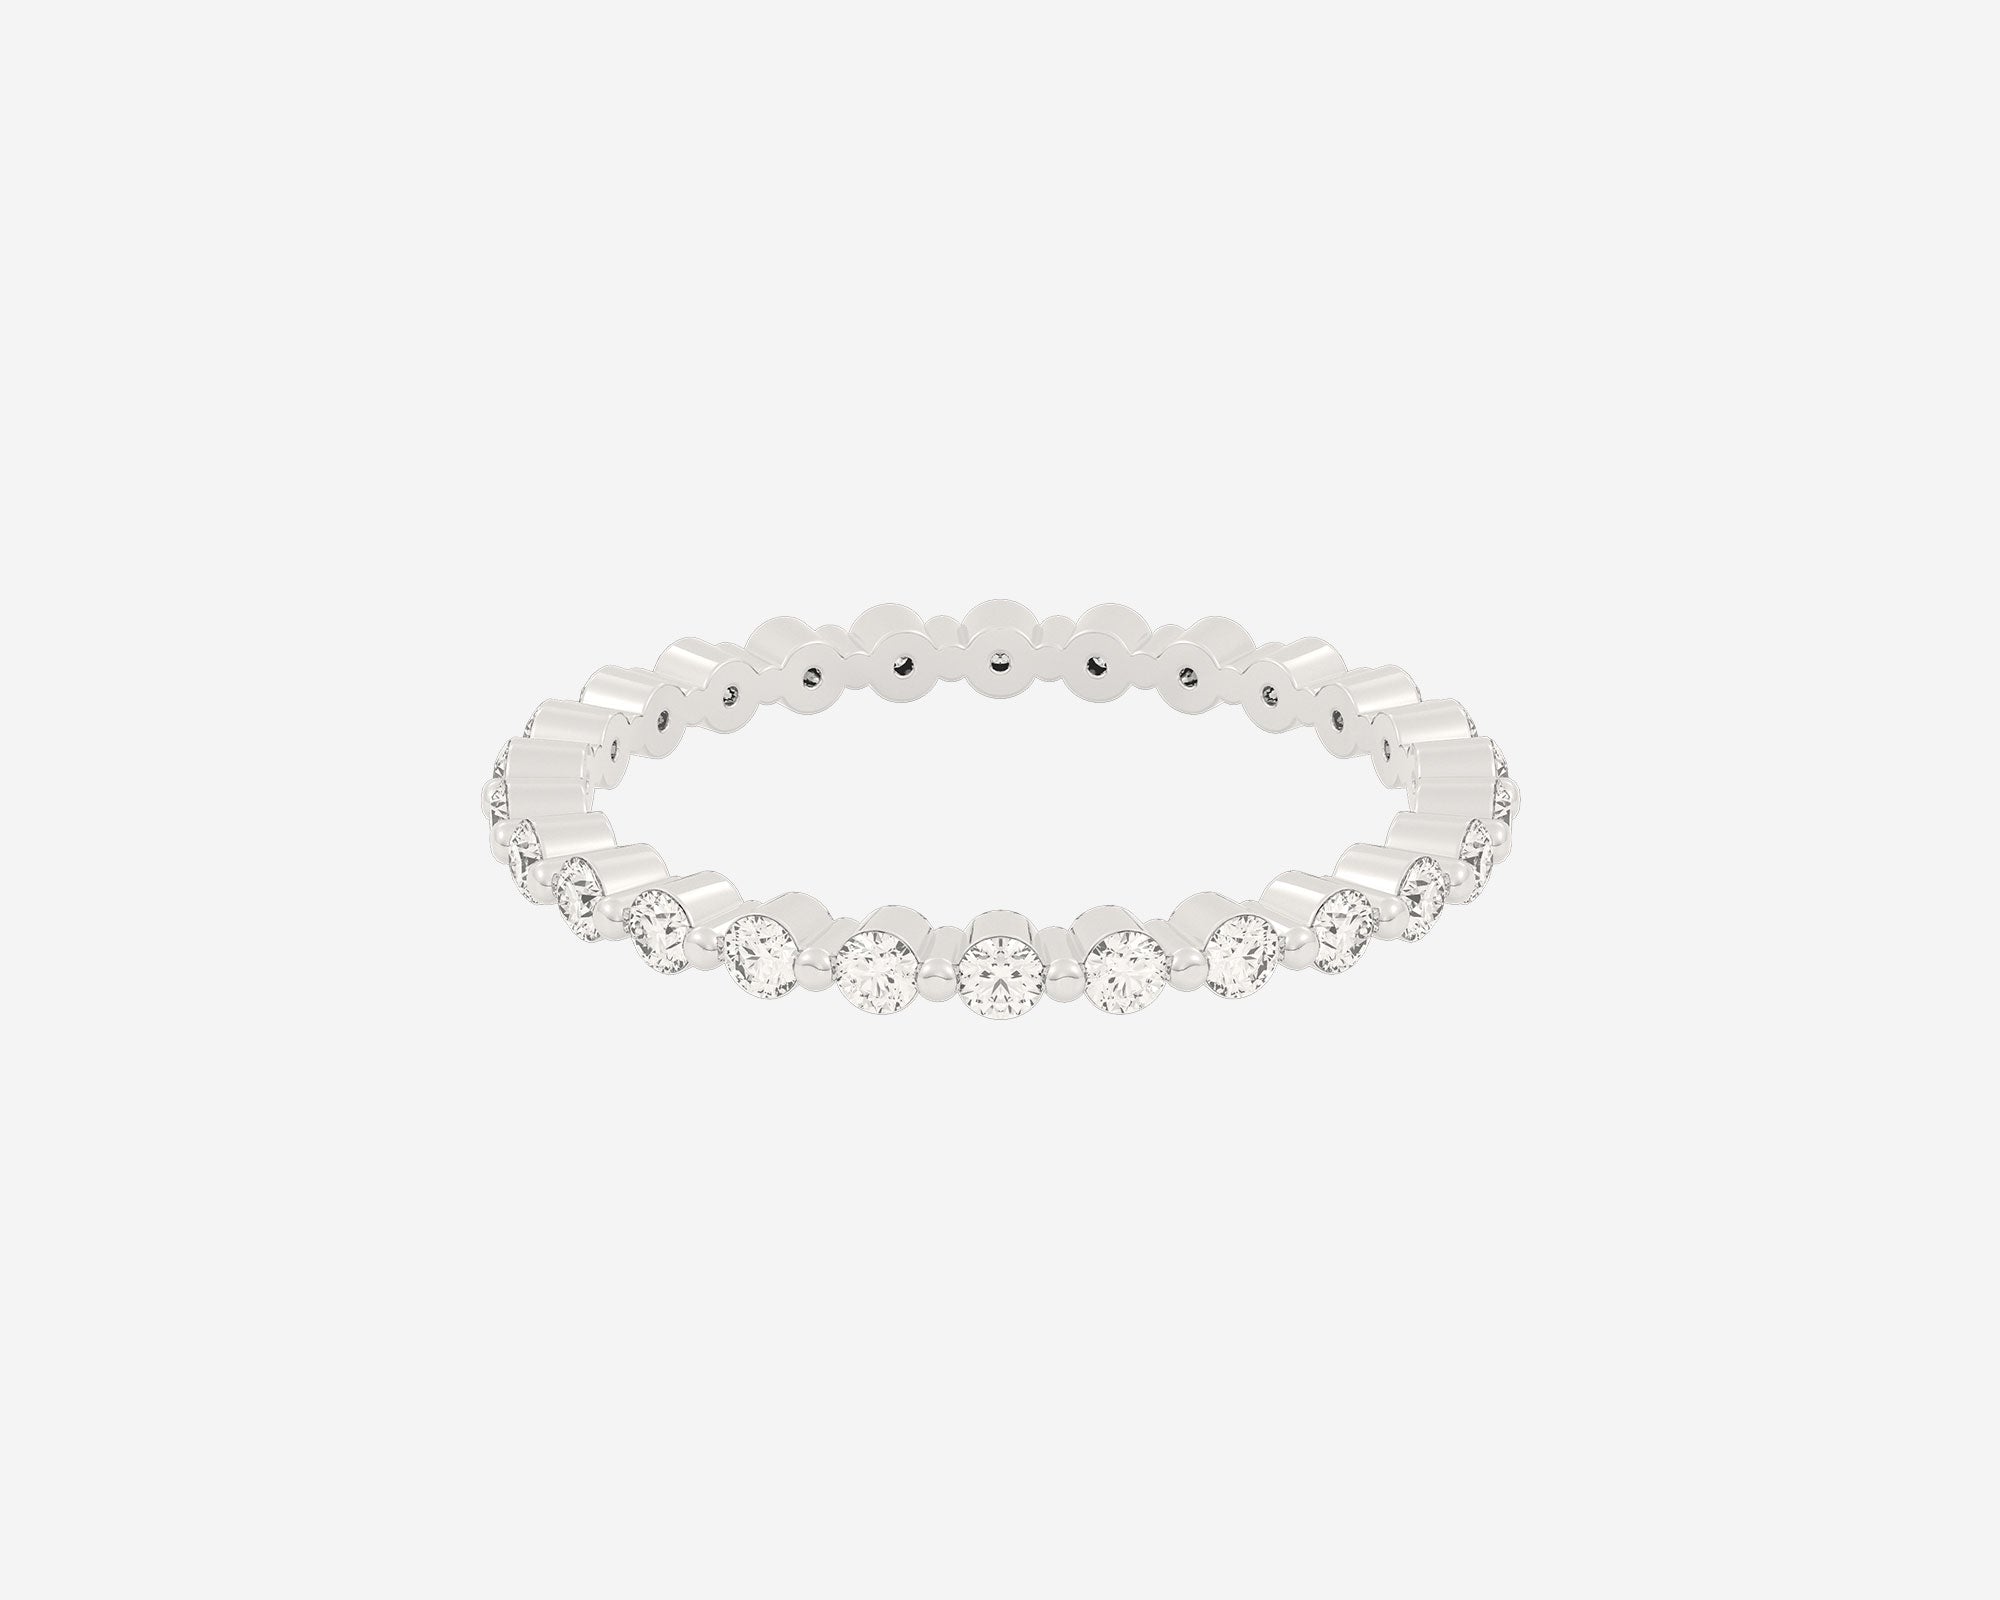 The Full Floating Eternity ring by Holden in white gold